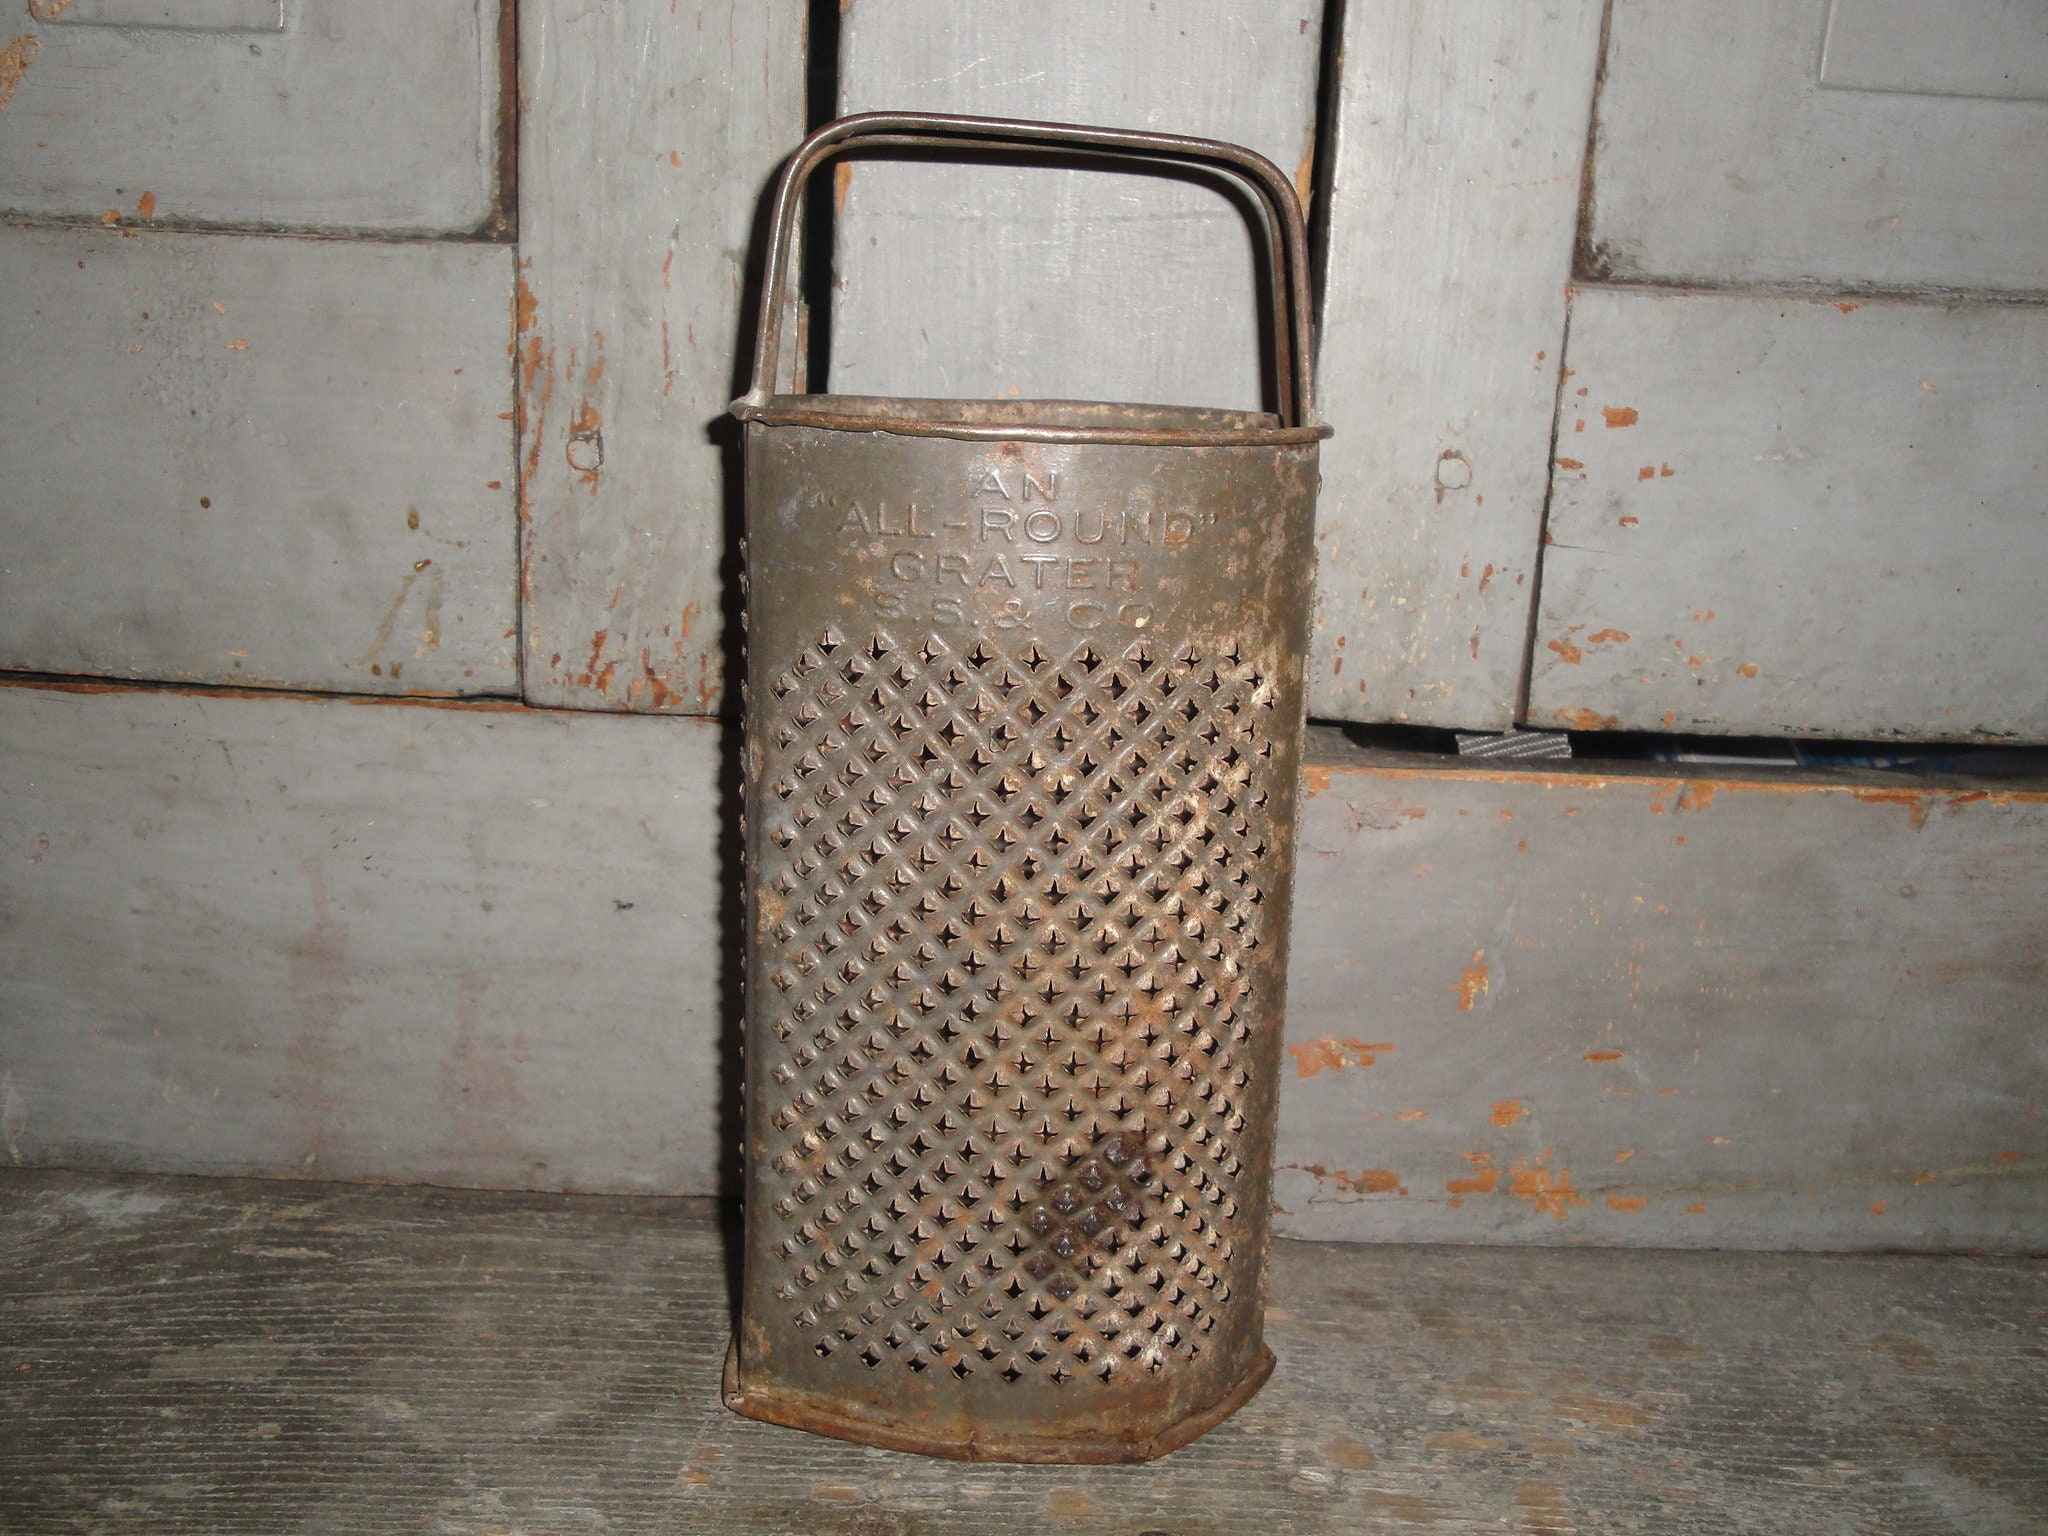 Vintage Tin Grater / Round Cheese Grater With 3 Sides / Rustic Industrial  Farmhouse Kitchen Decor / Cheese Vegetable Grater / Hand Grater 